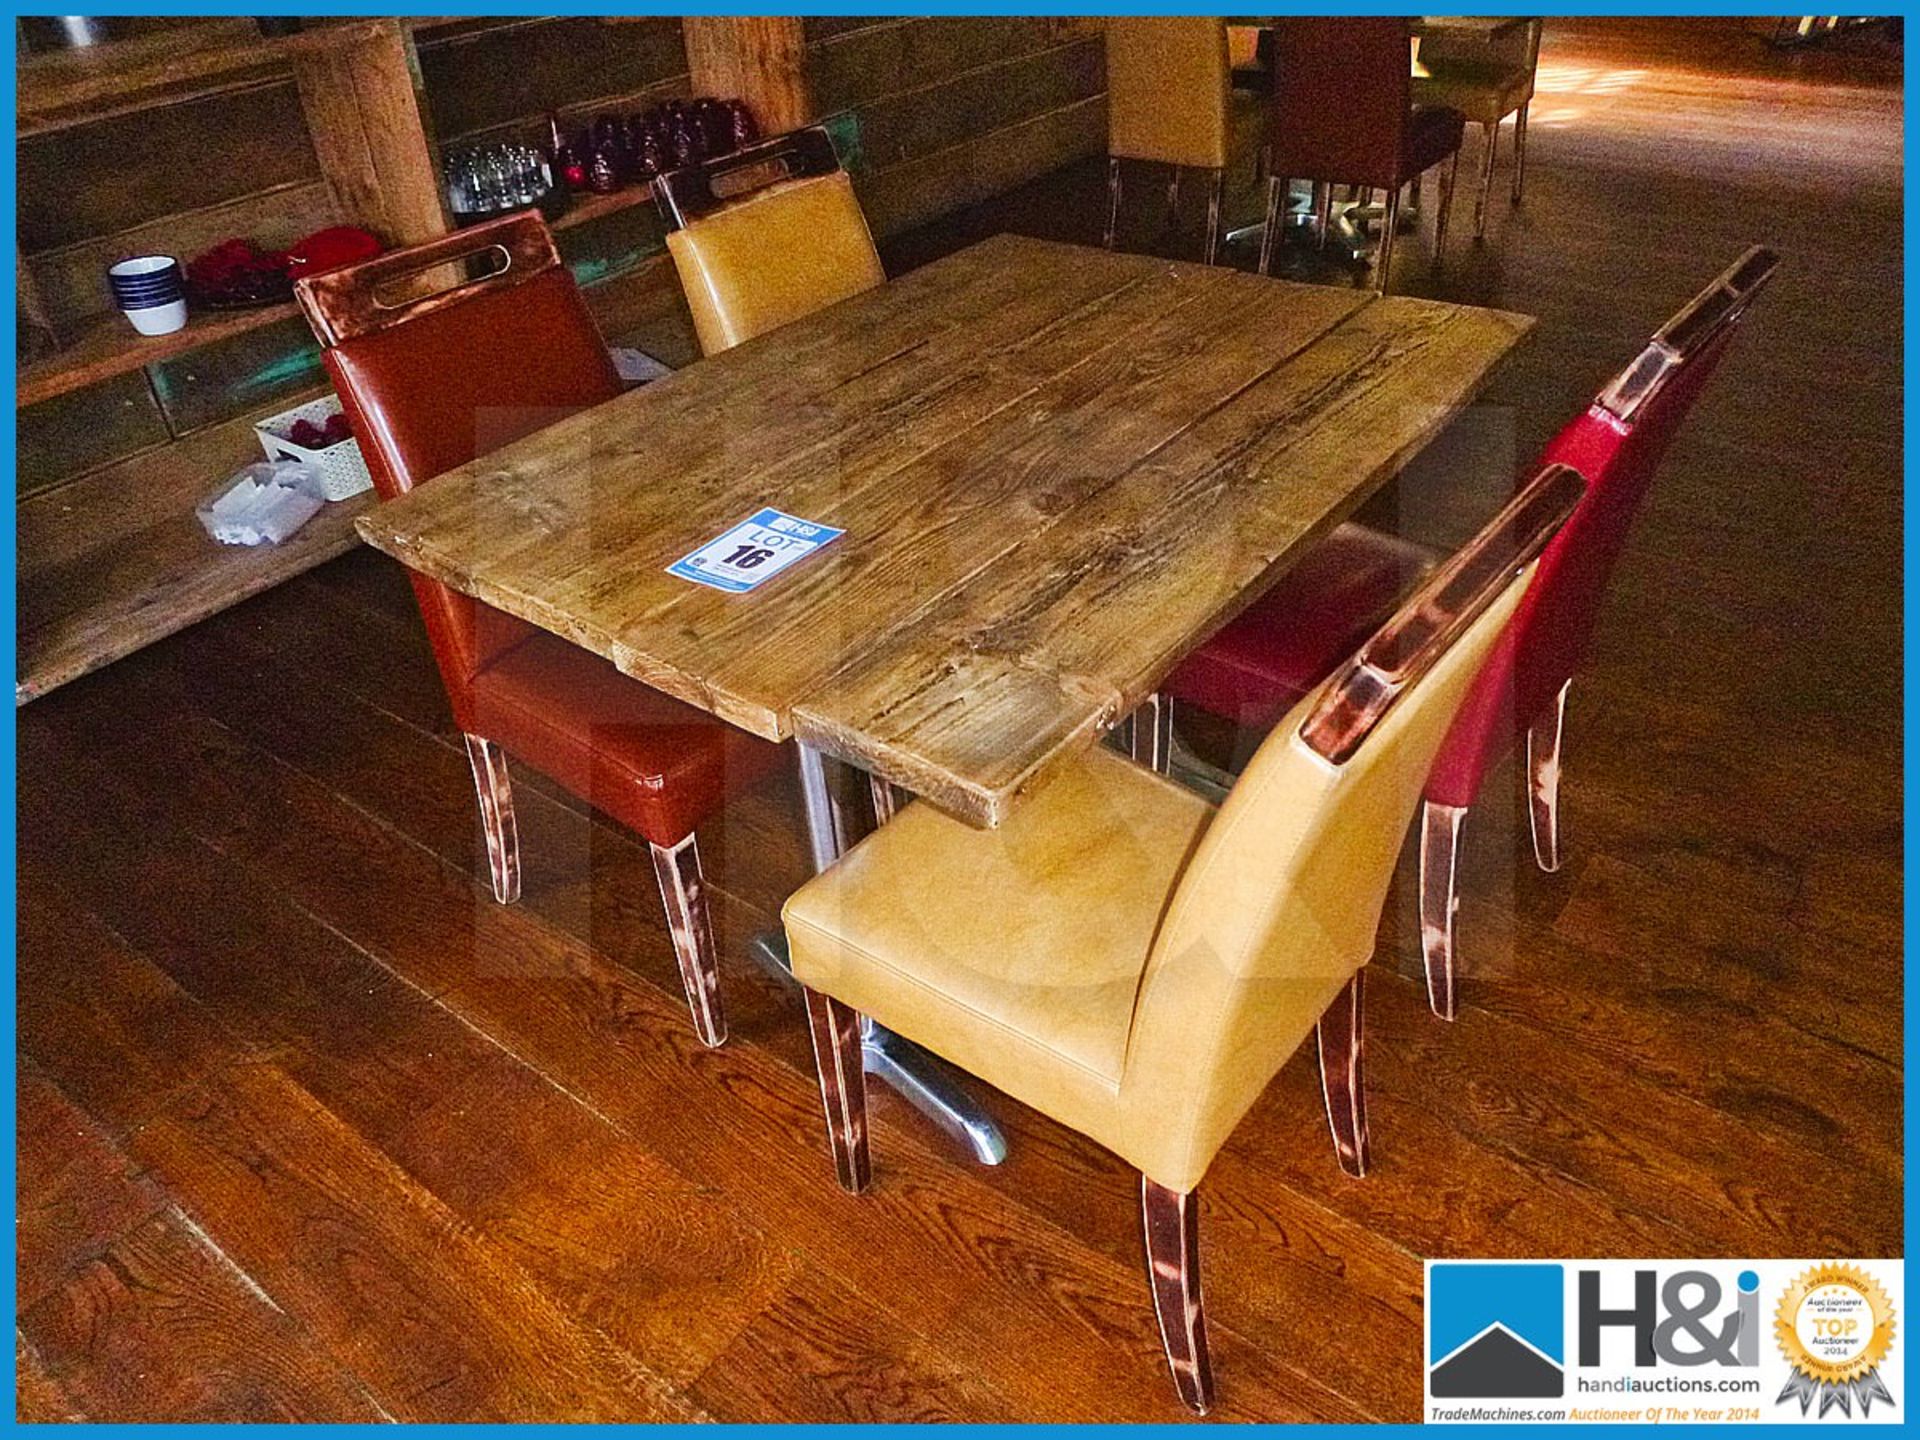 4ft Rustic dining table with metal legs compete with four chairs - Image 2 of 4